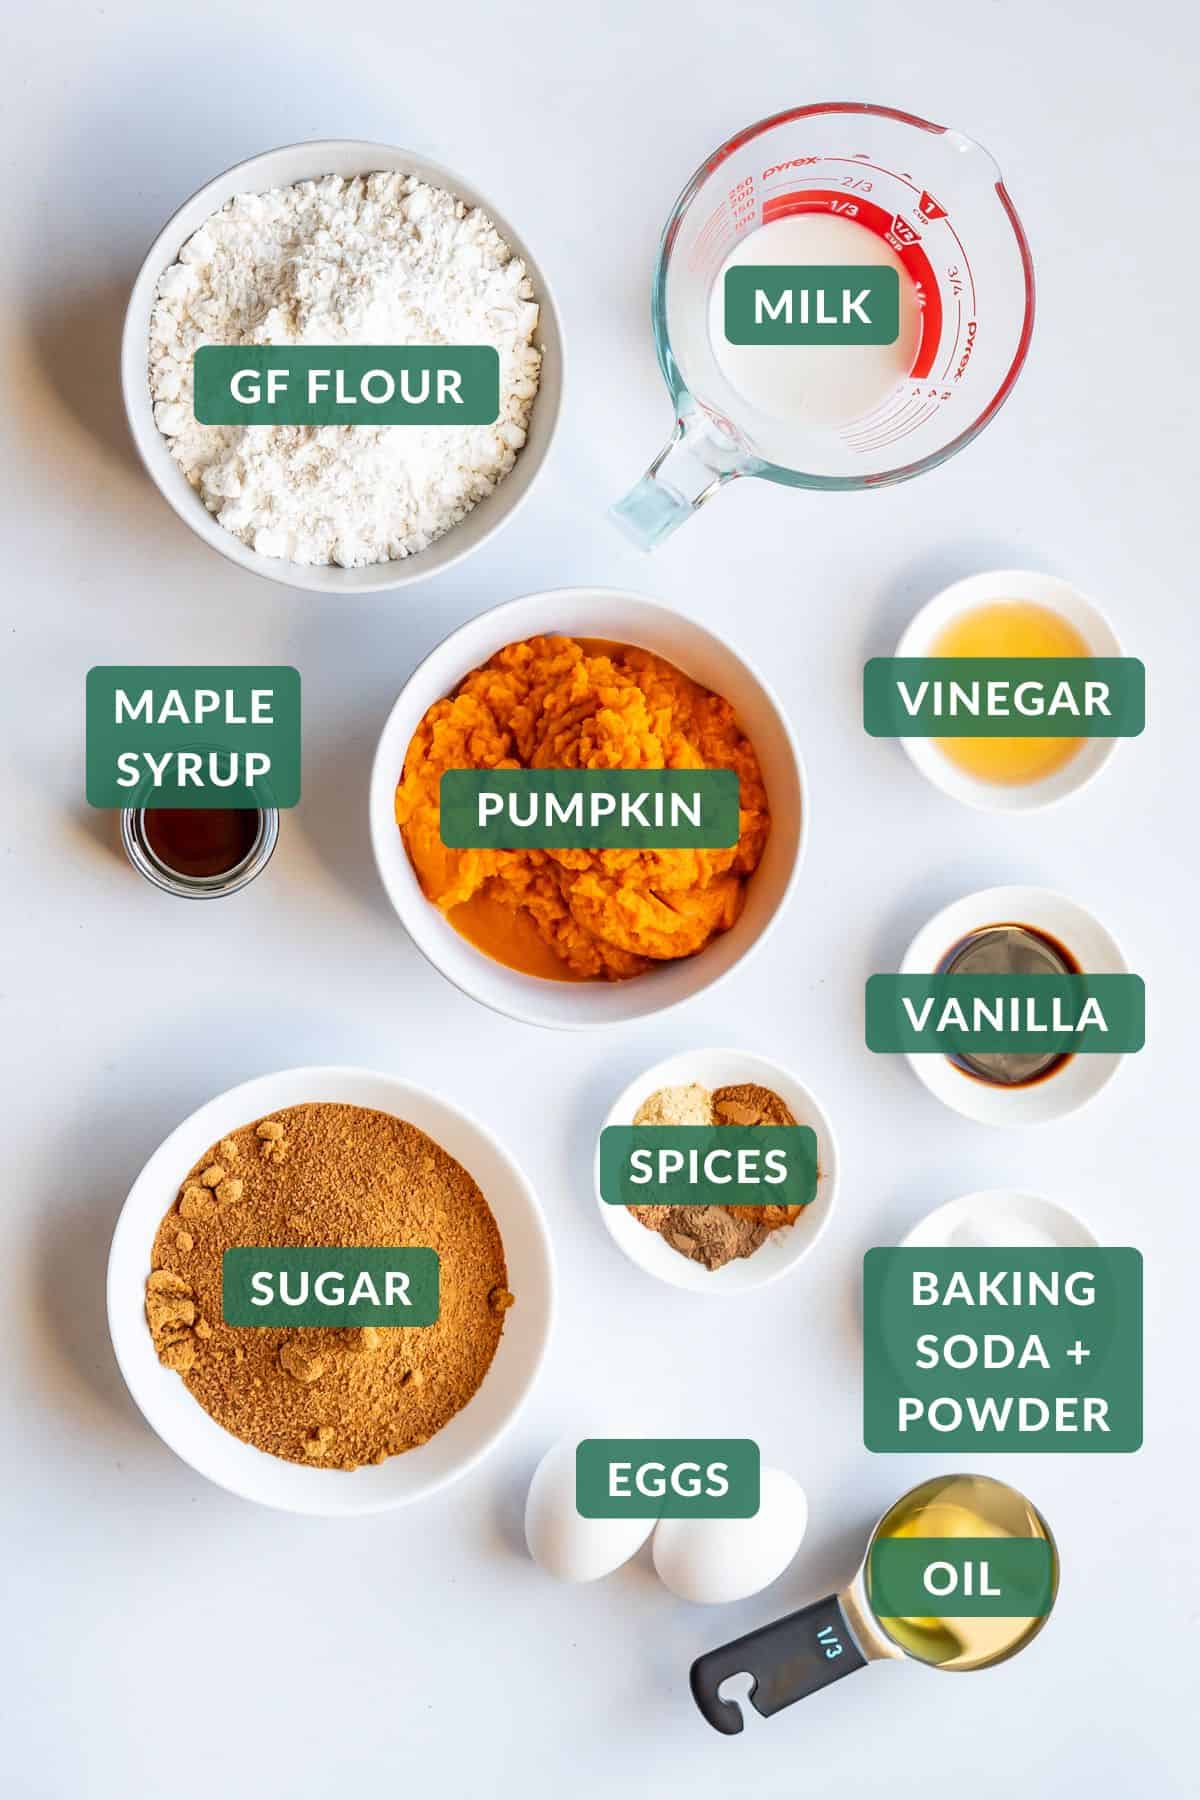 The ingredients needed to make gluten-free pumpkin bread measured for baking.